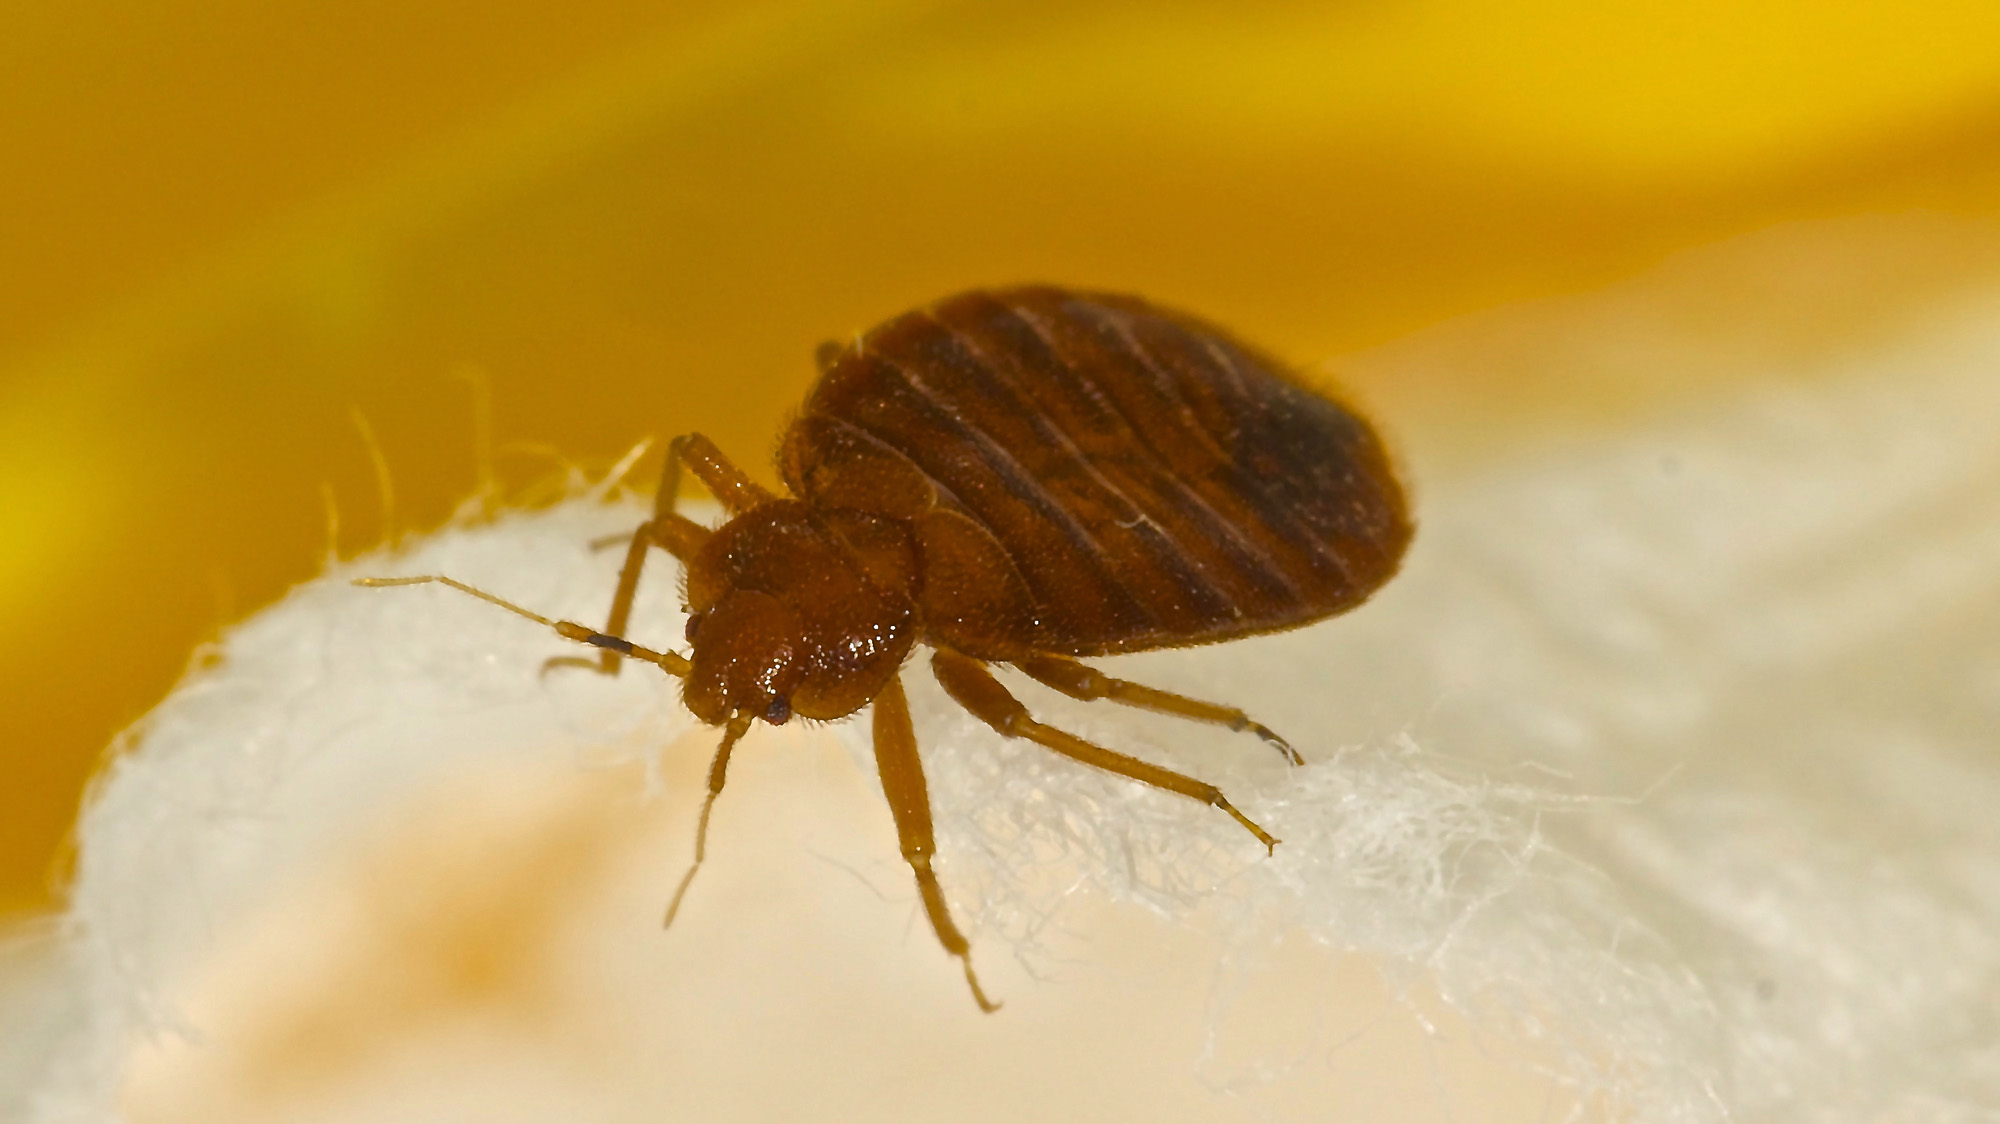 Getting rid of bed bugs is trickier than ever